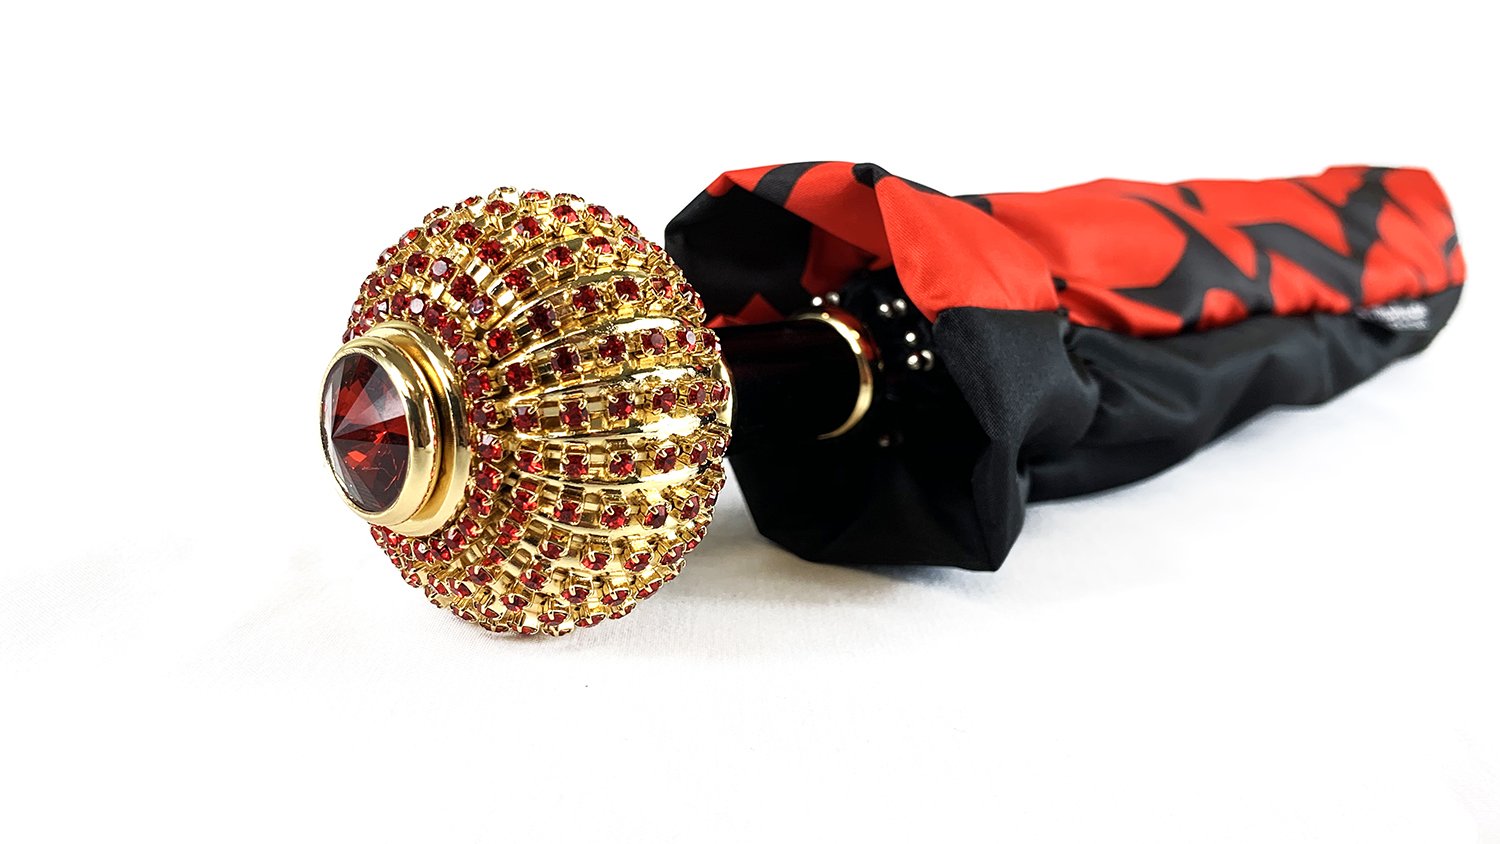 Handmade umbrella with Sphere decorated with red crystals - IL MARCHESATO LUXURY UMBRELLAS, CANES AND SHOEHORNS